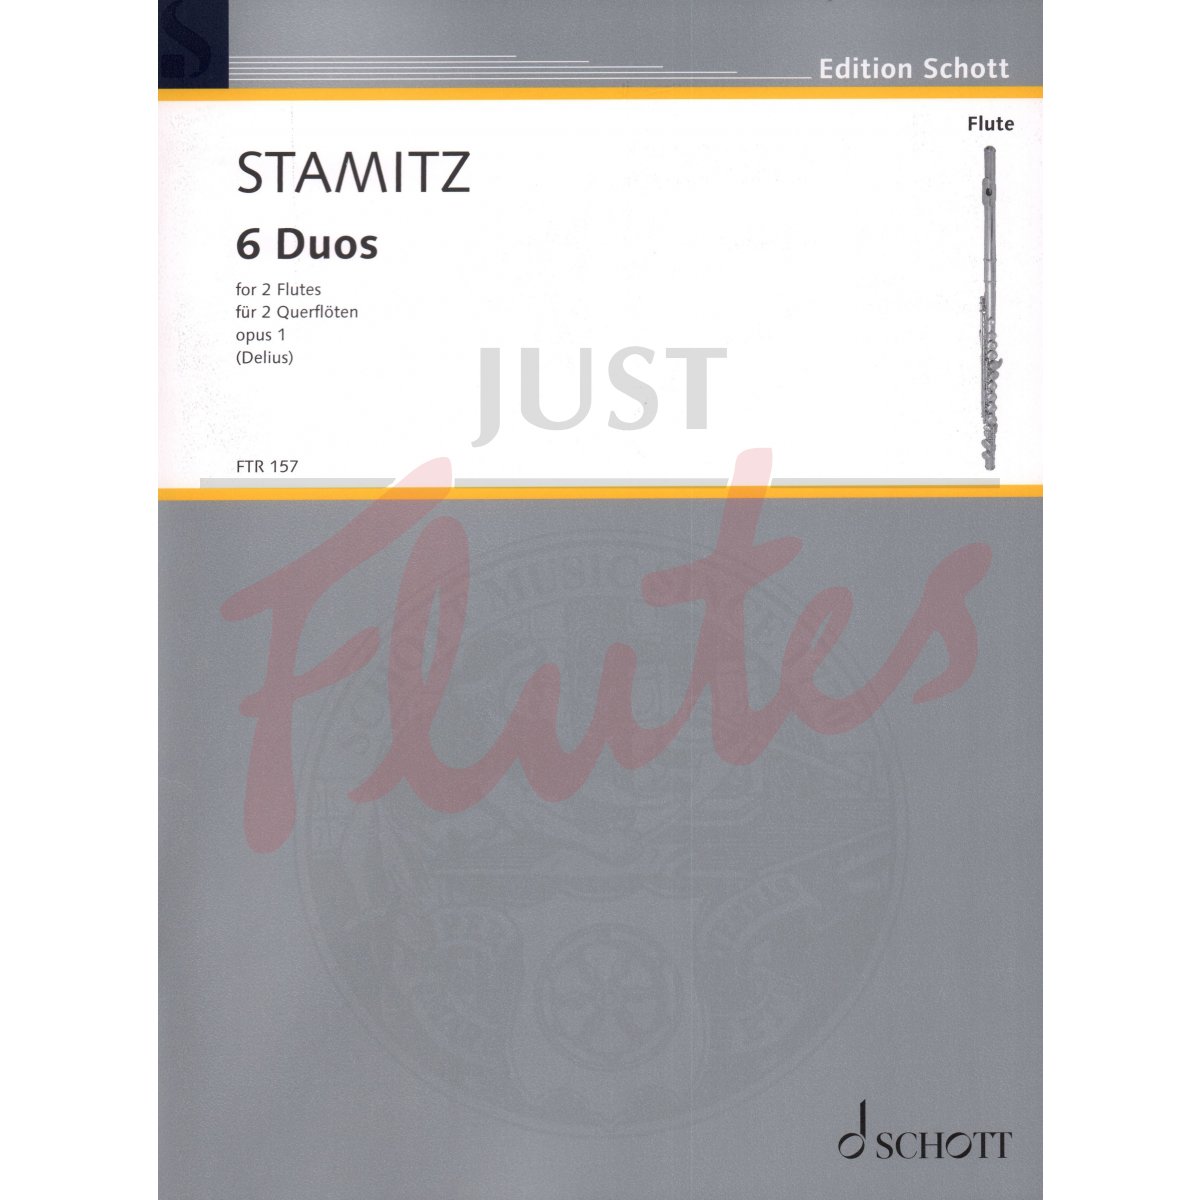 6 Duos for Two Flutes